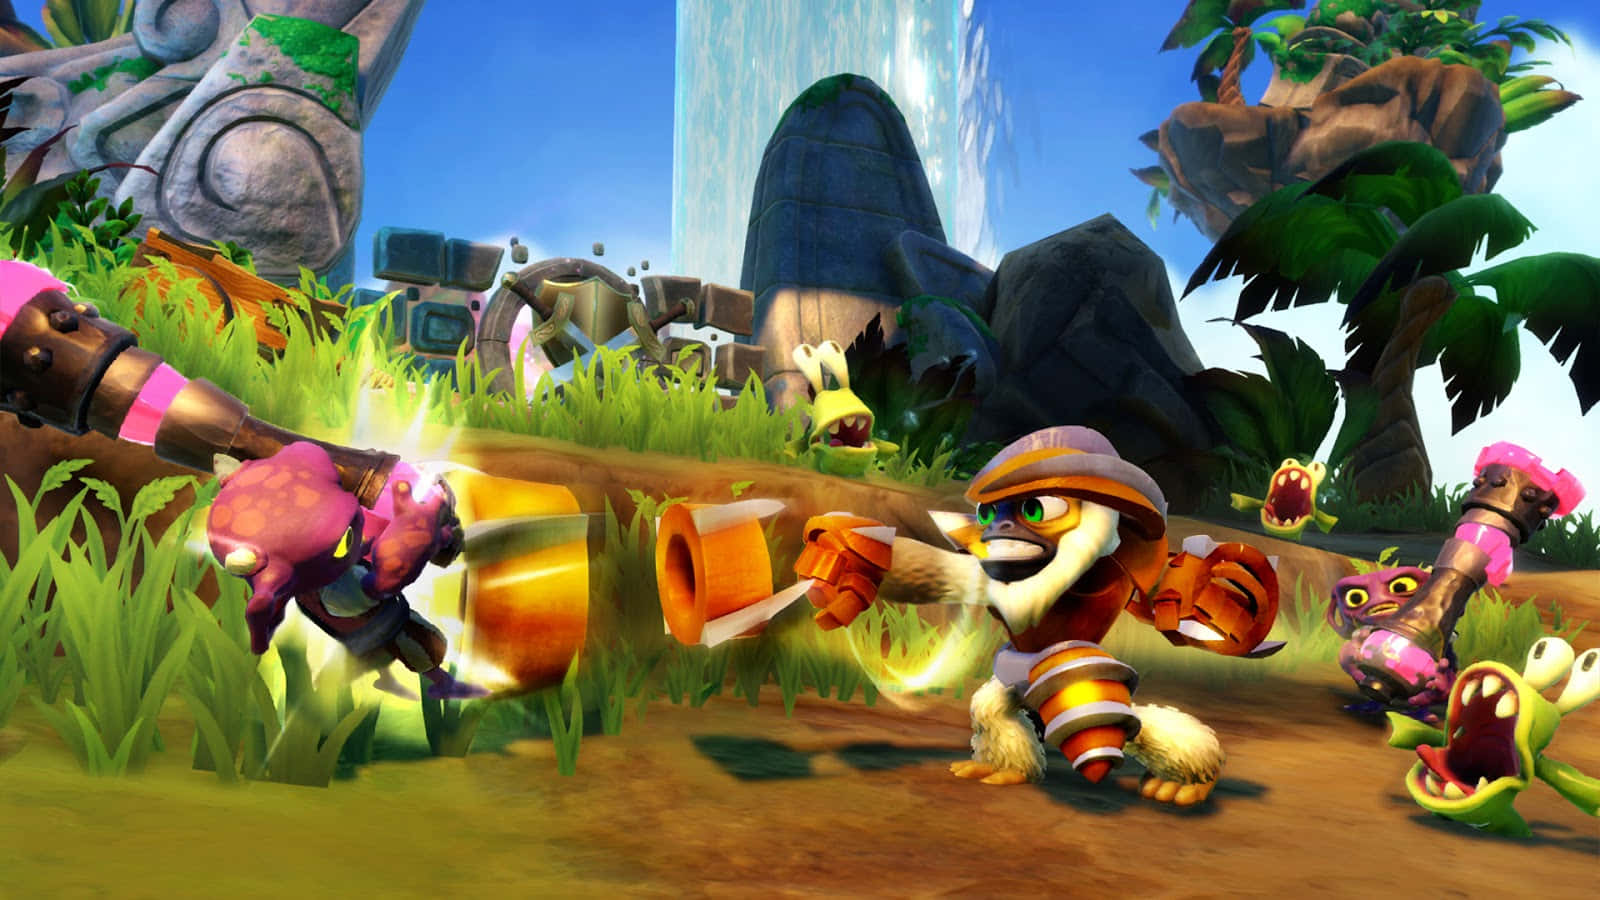 “Welcome to the magical world of Skylanders!” Wallpaper